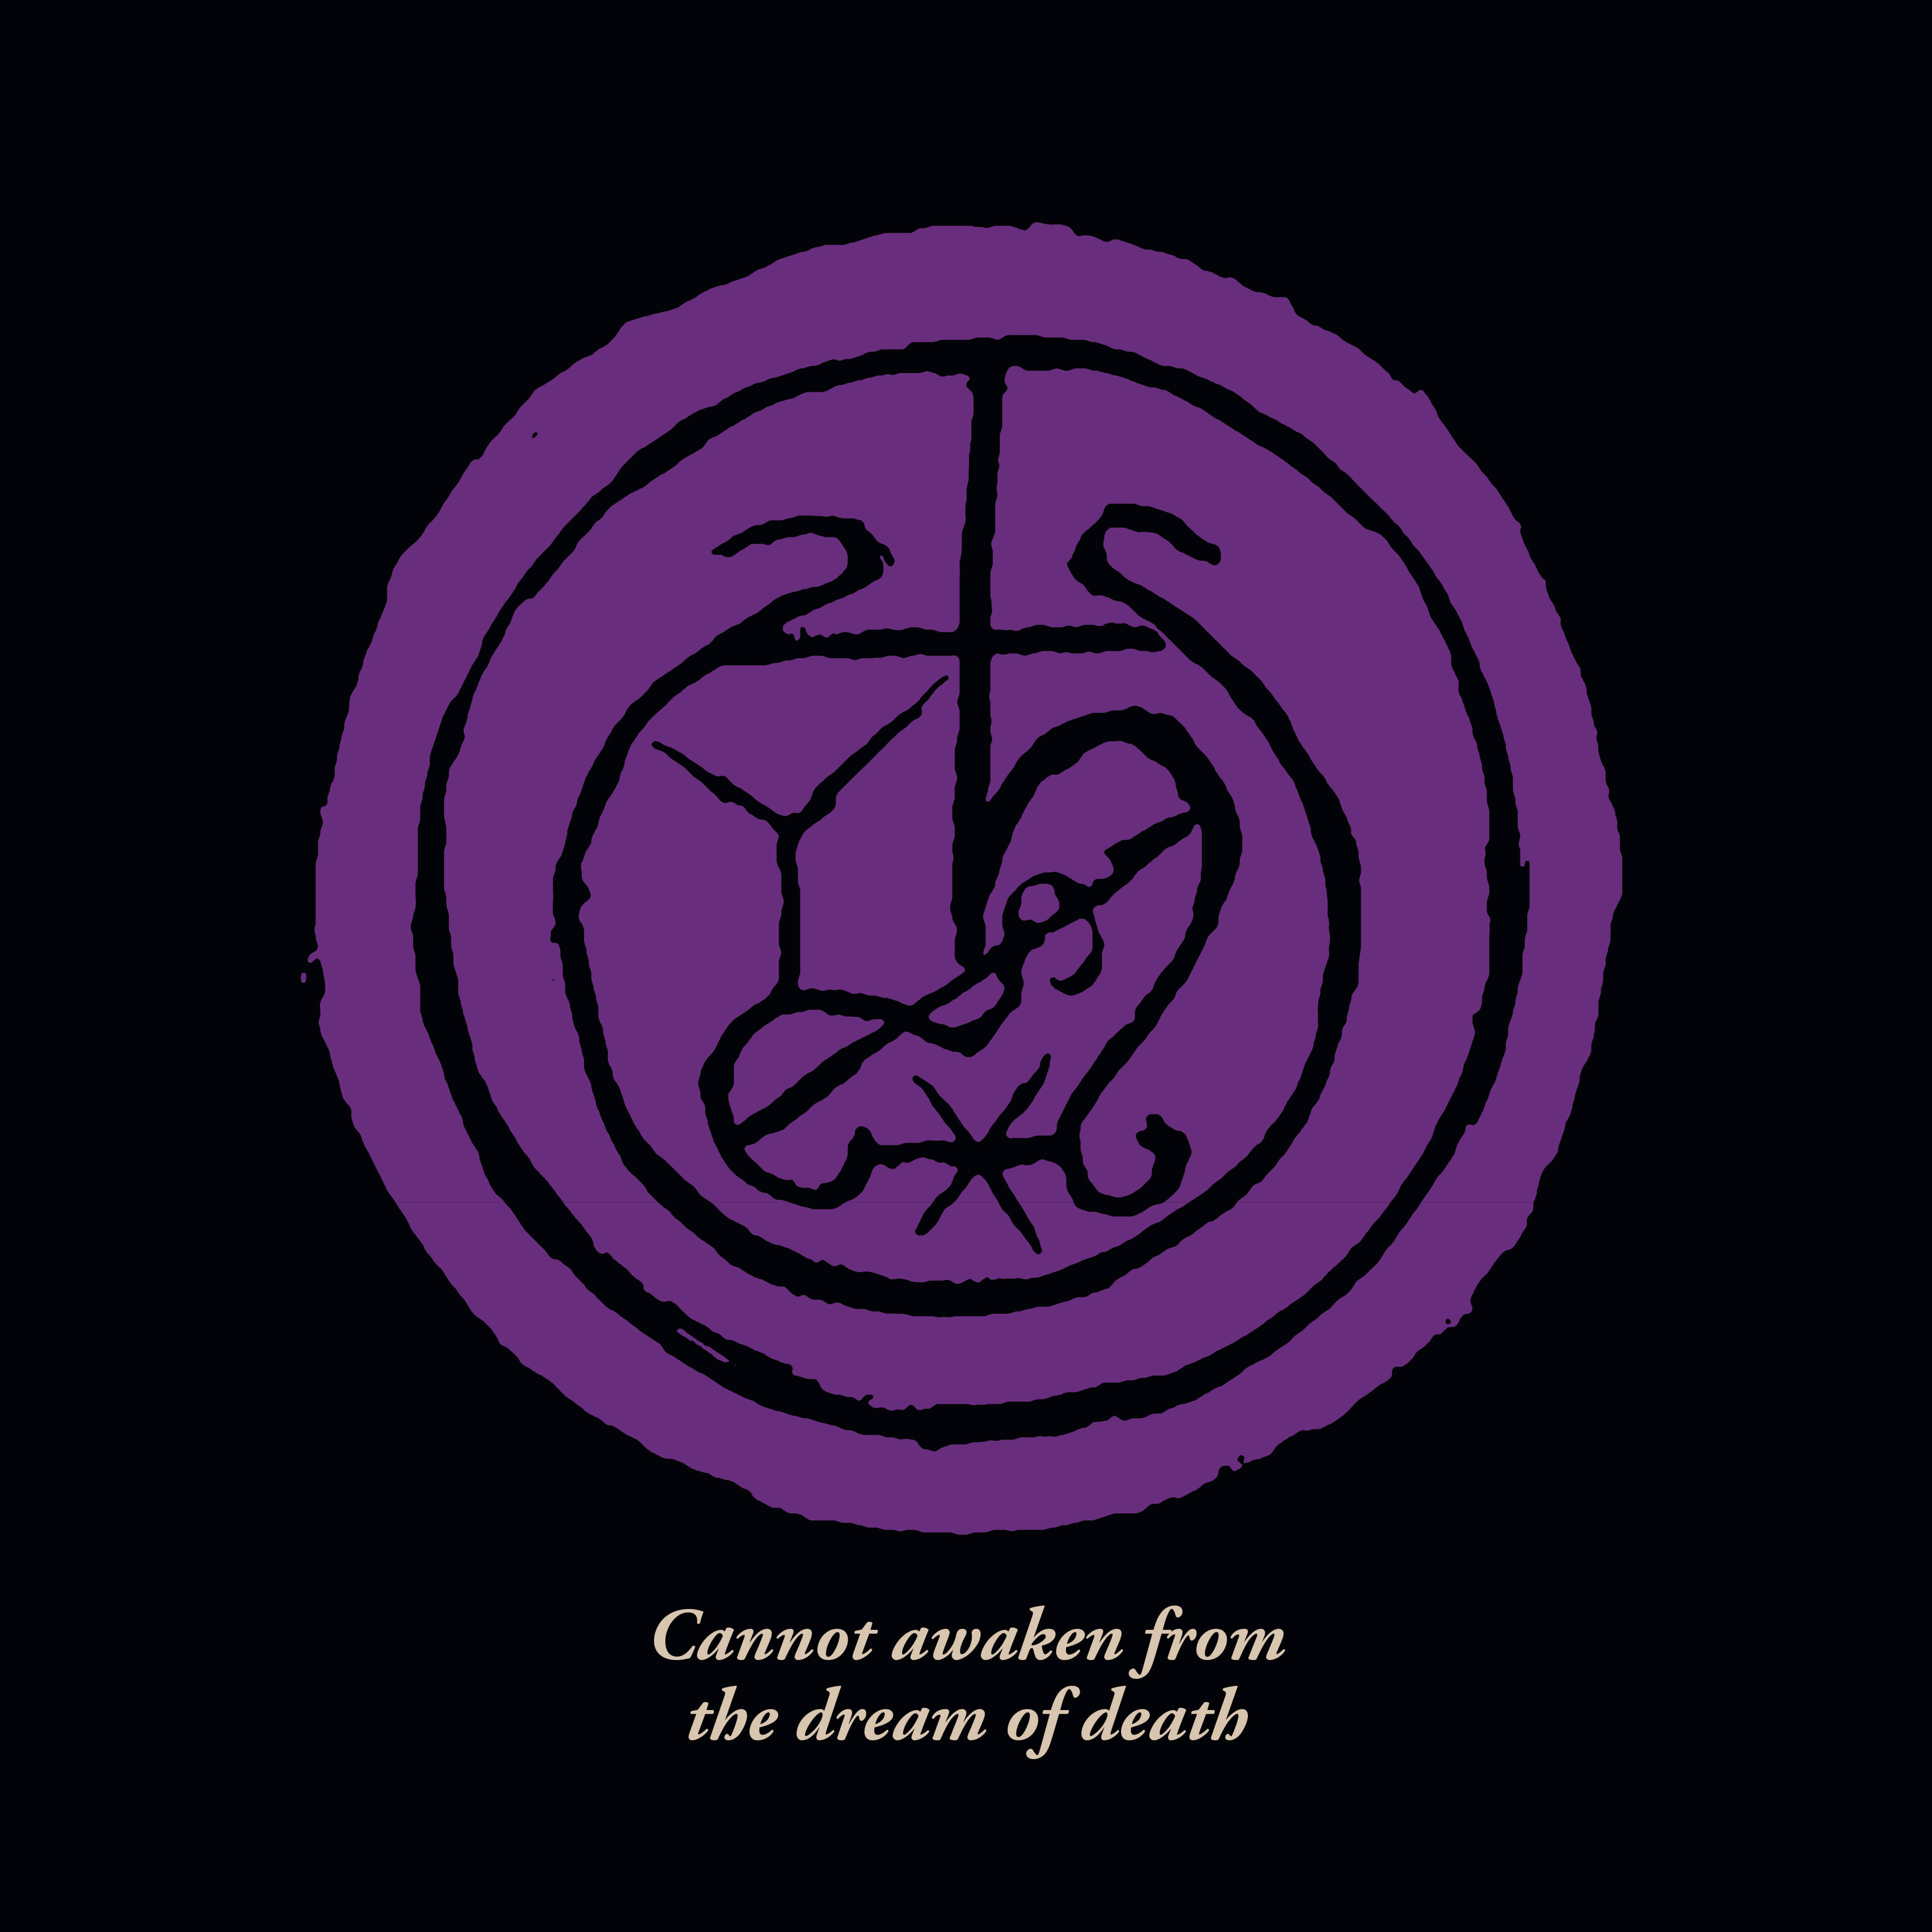 Cannot awaken frmo the dream of death